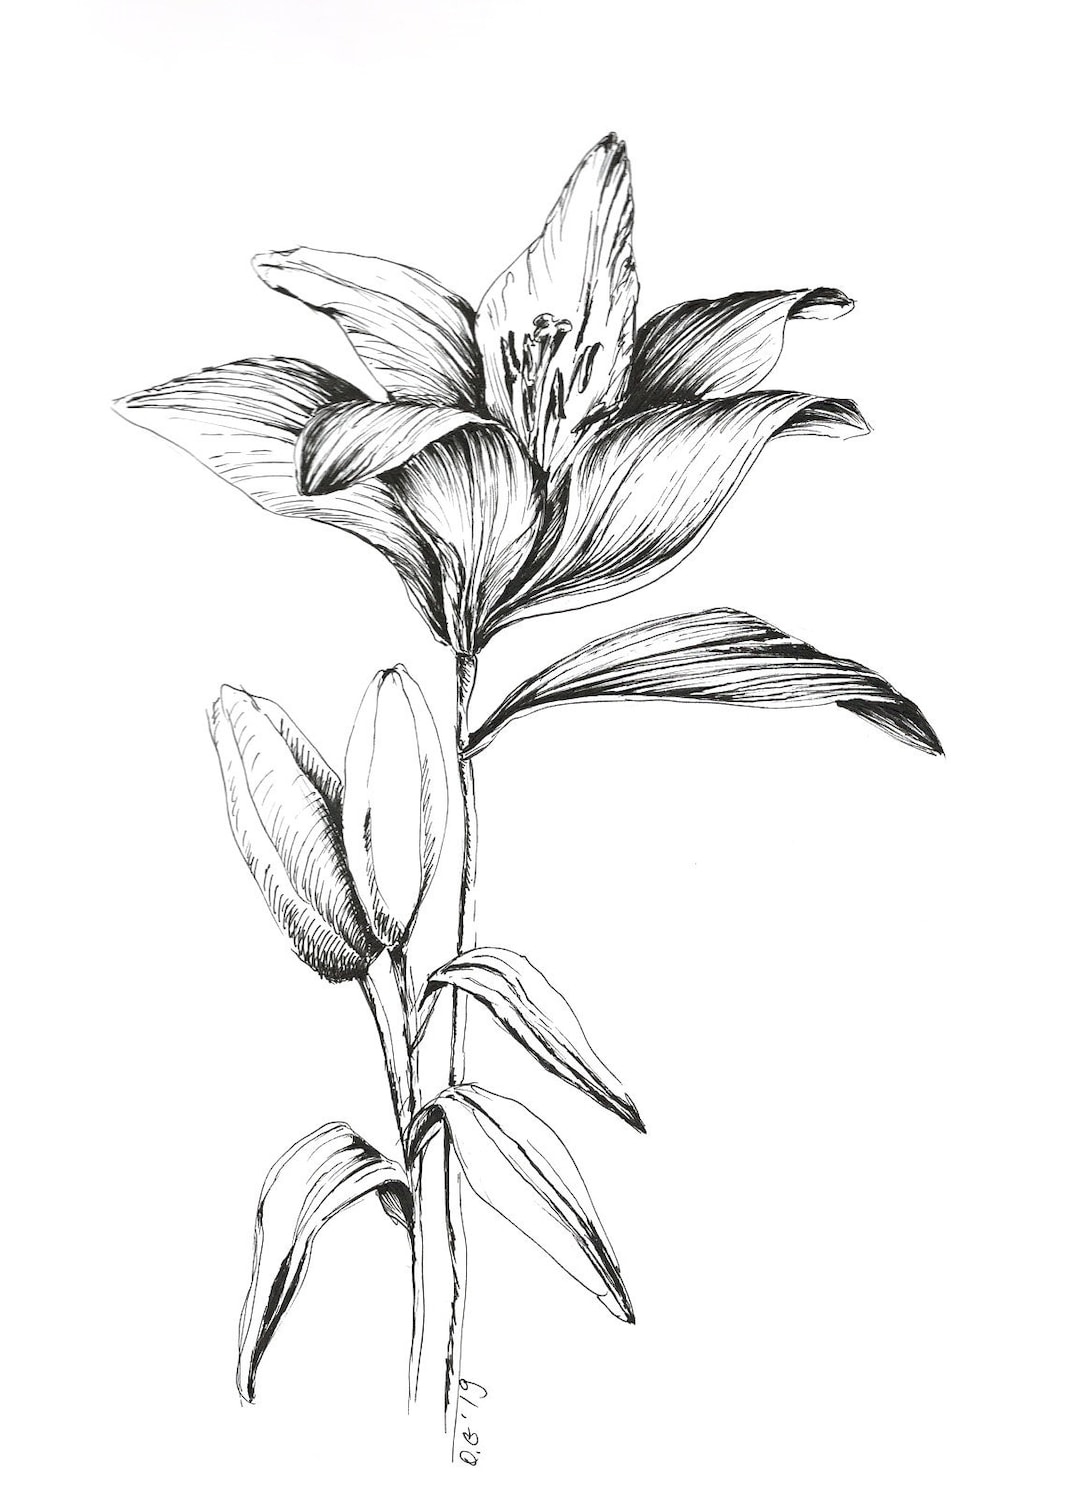 Lily Flower Drawing Images - Free Download on Freepik